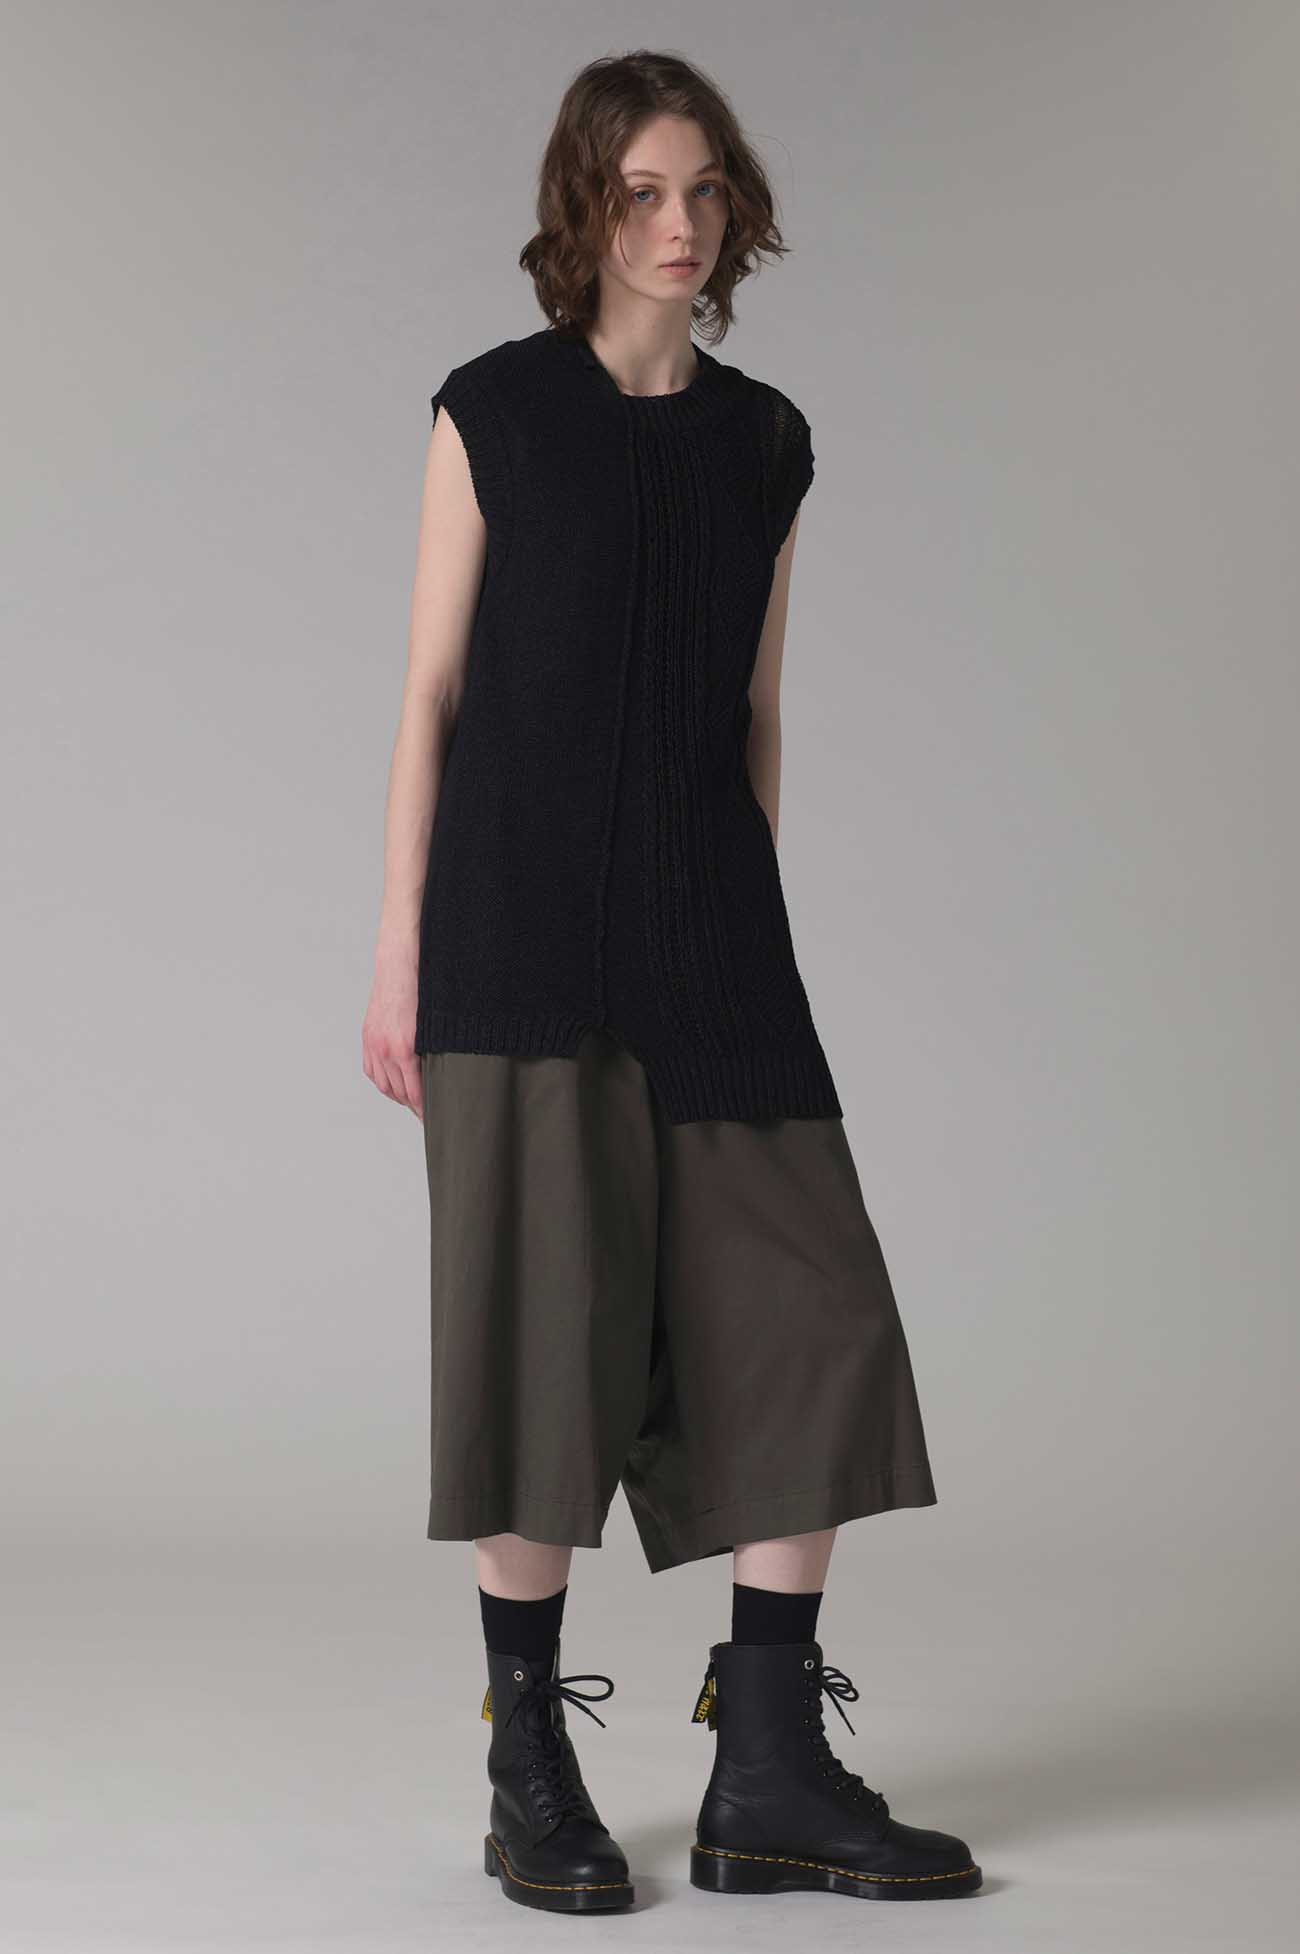 [Y's BORN PRODUCT]COTTON TWILL 3/4 LENGTH STRING PANTS